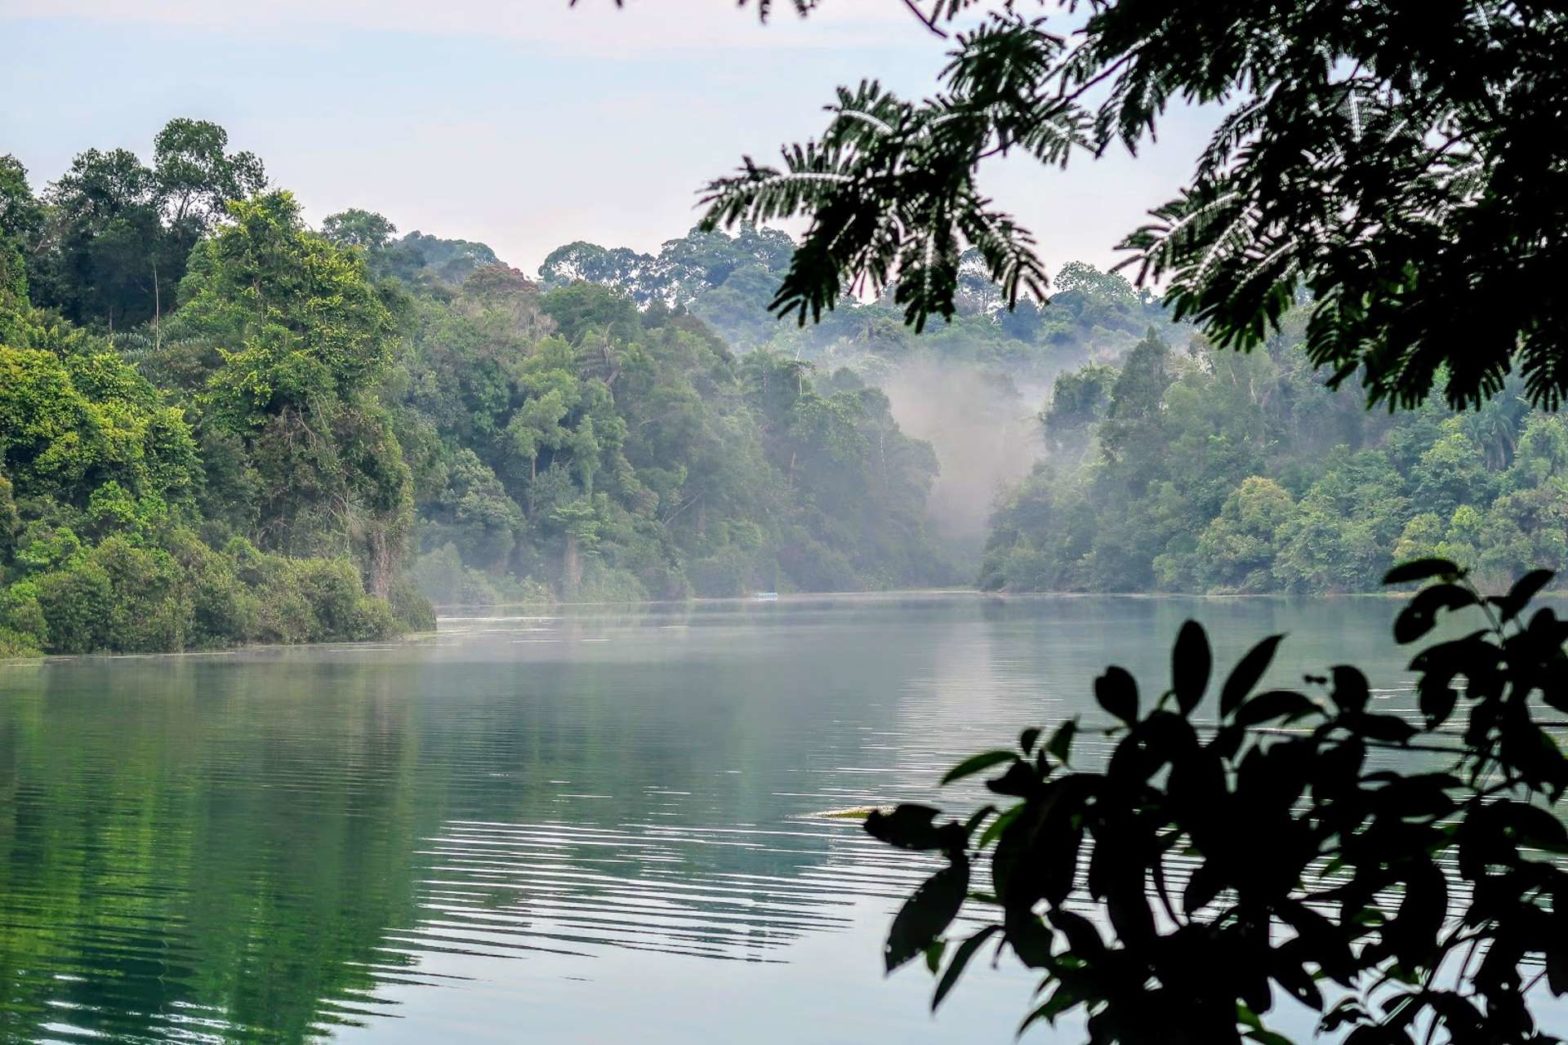 Misty morning at MacRitchie Reservoir